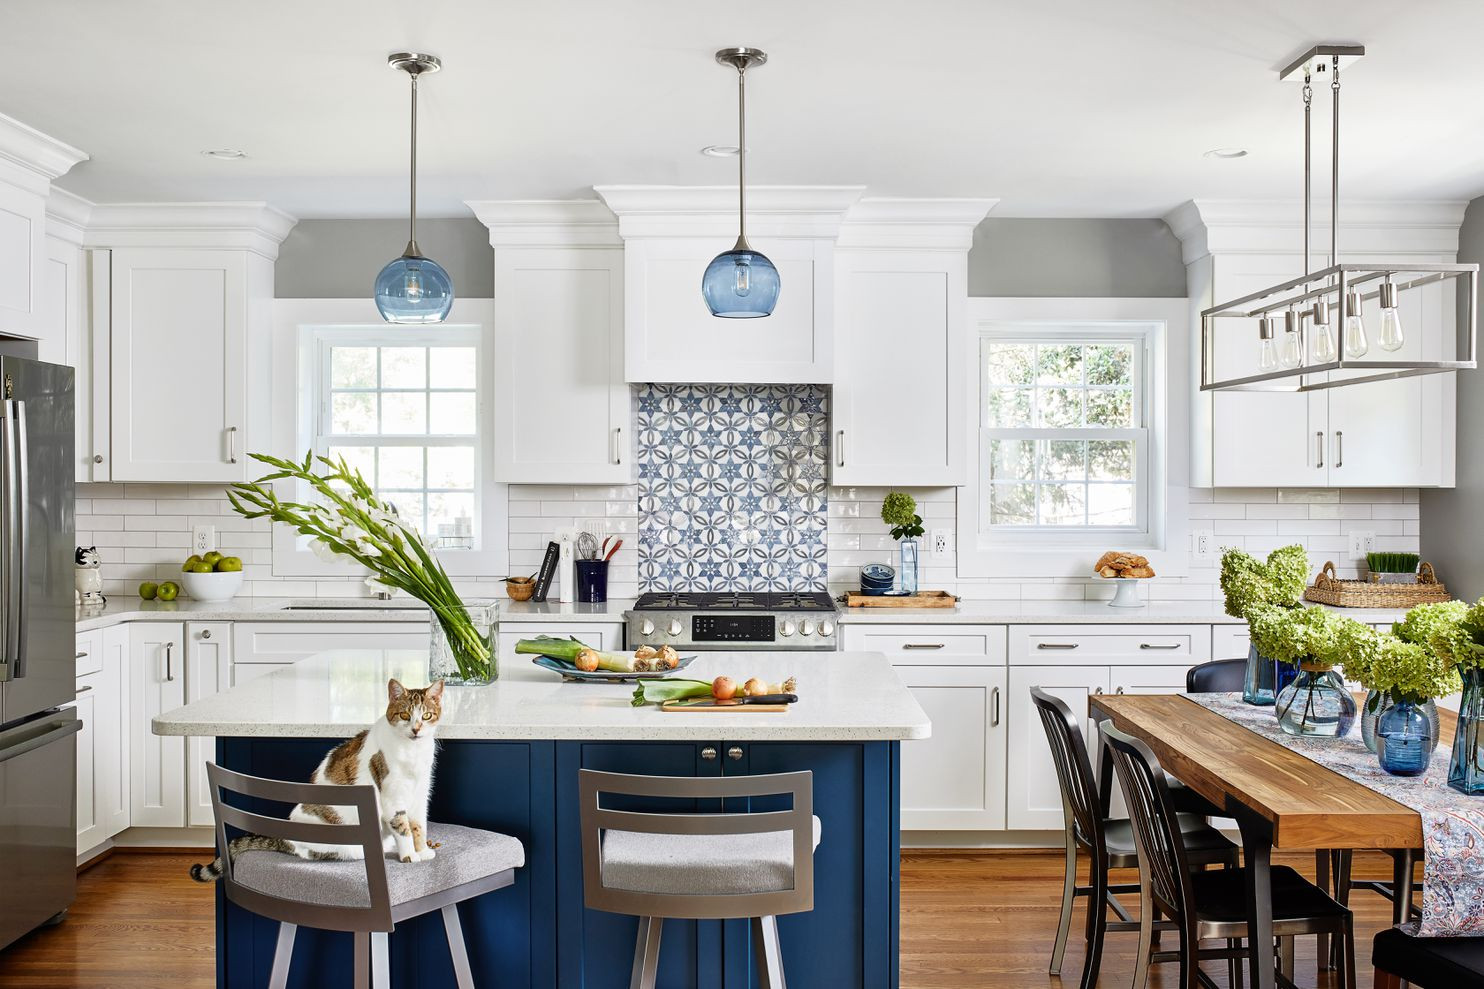 Kitchen Remodels 2020
 A closer look at kitchen design trends for 2020 The